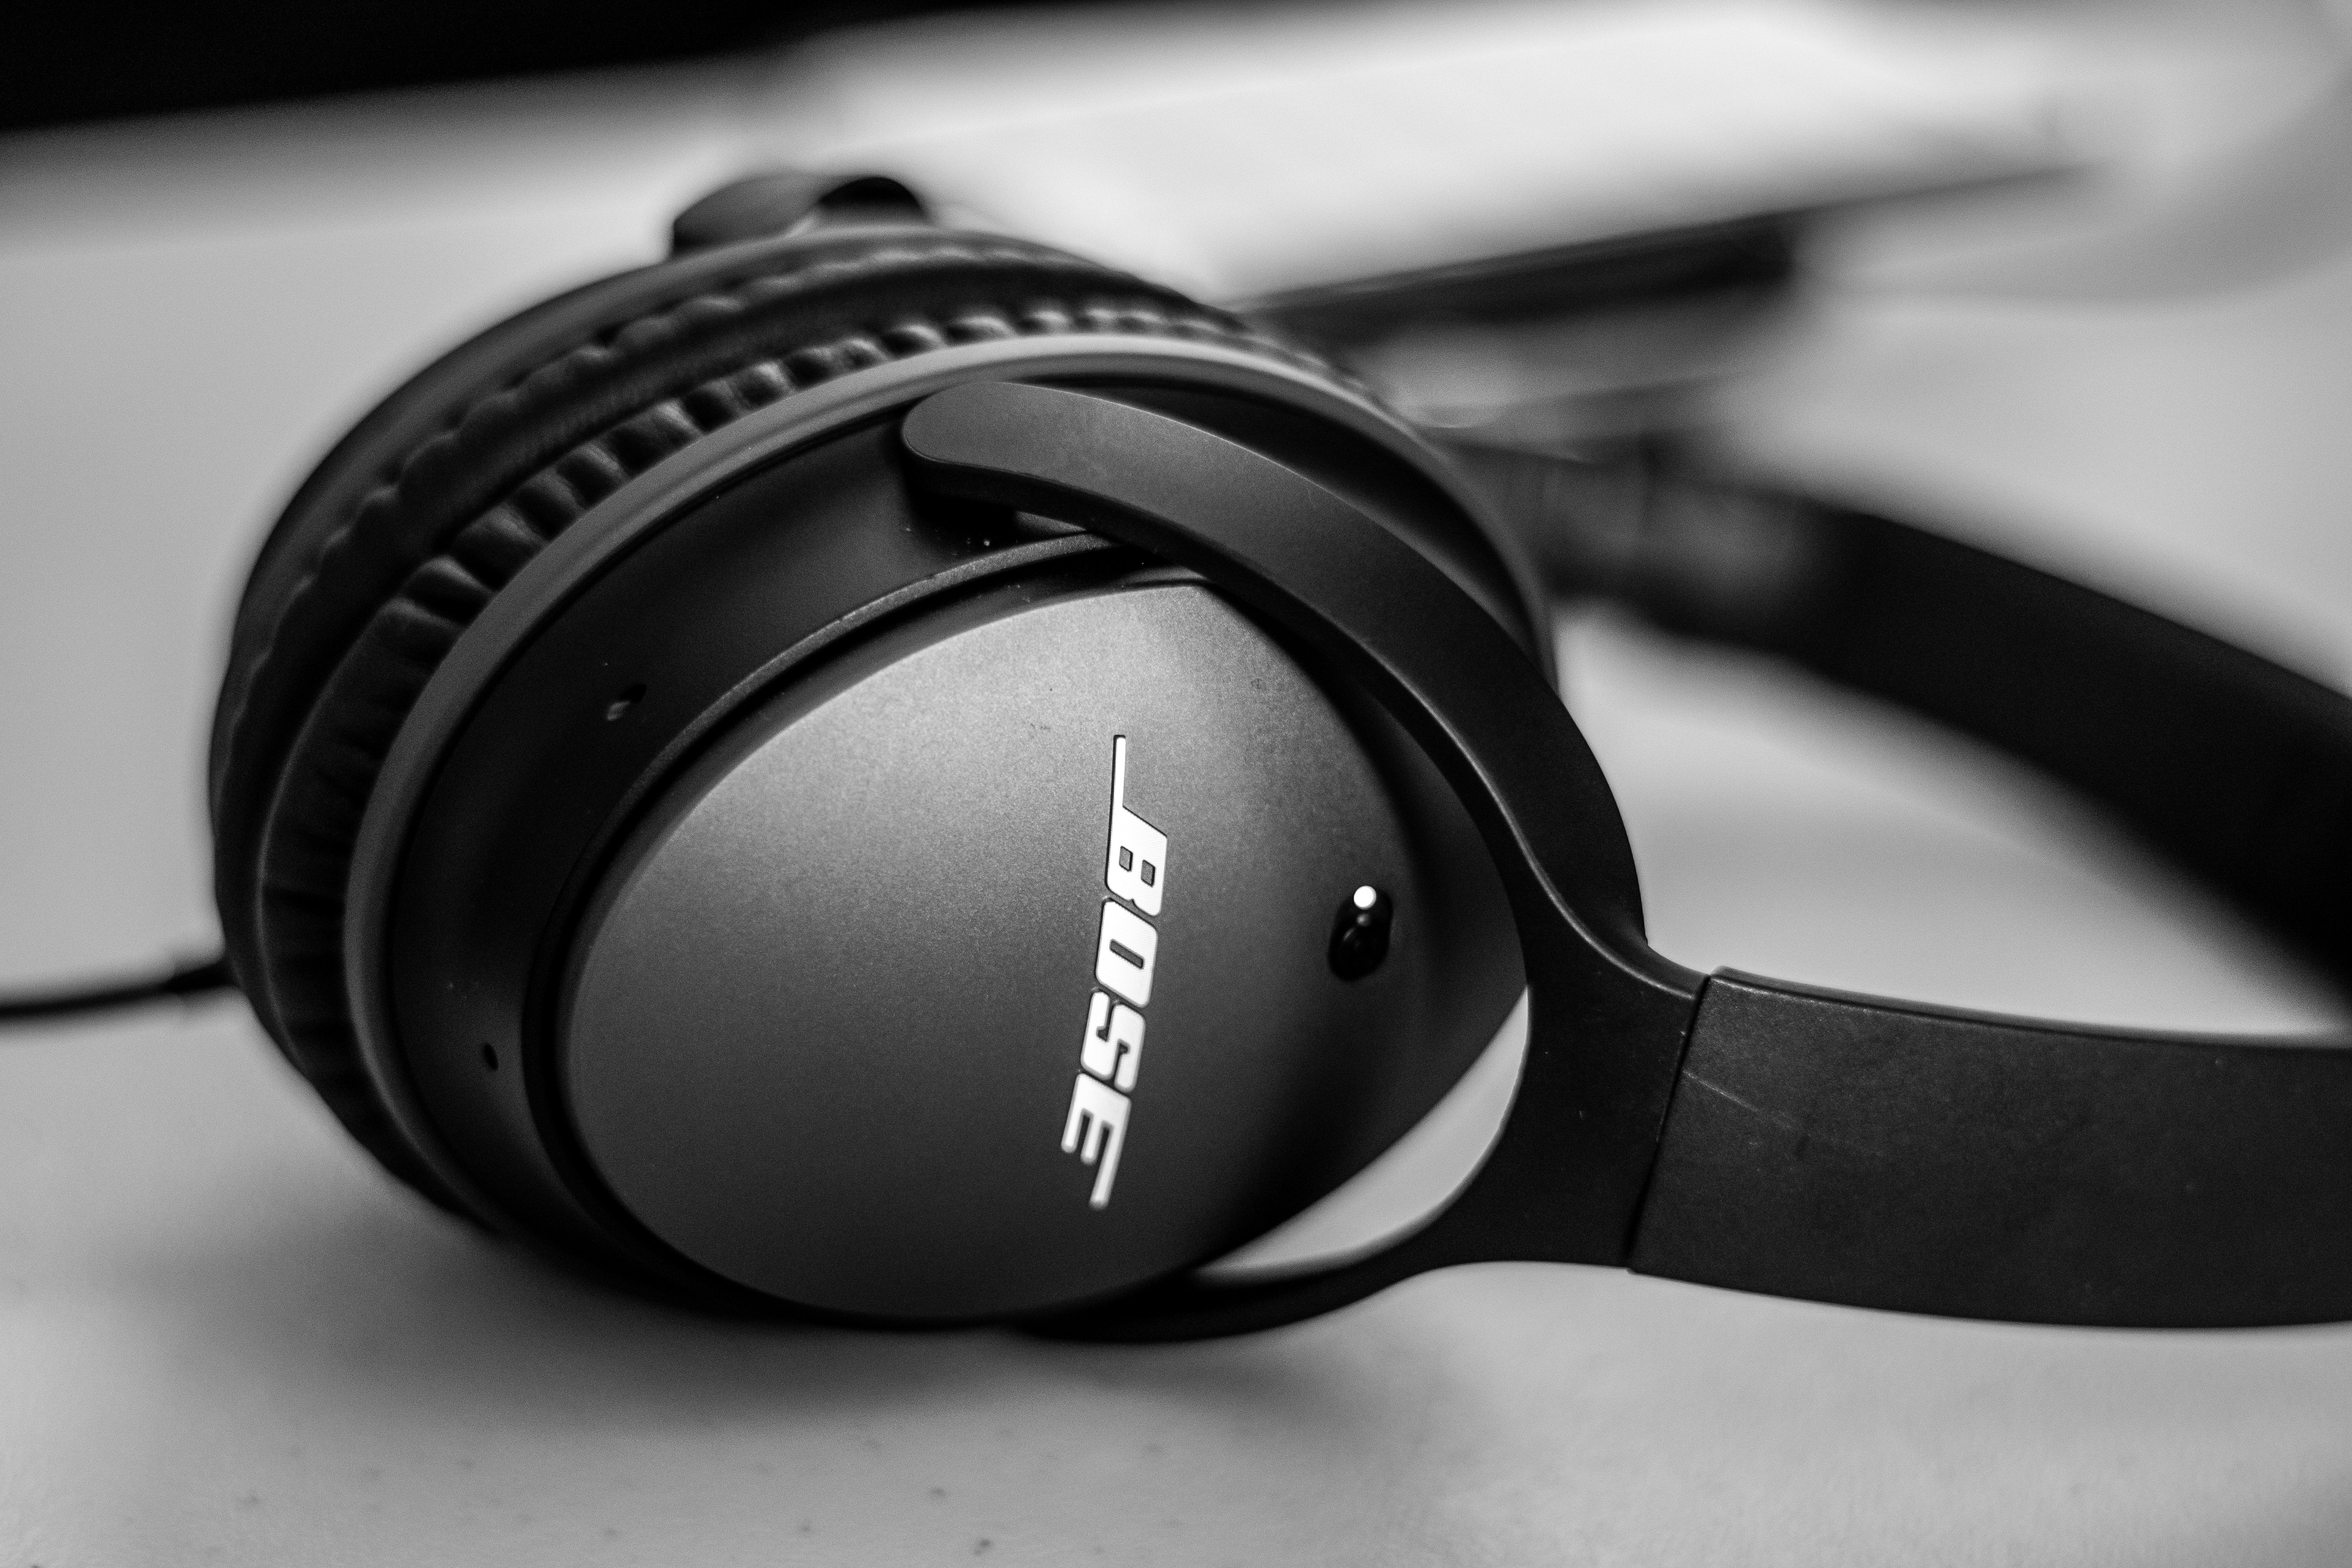 Bose Headphones which use a type of Dynamic Driver